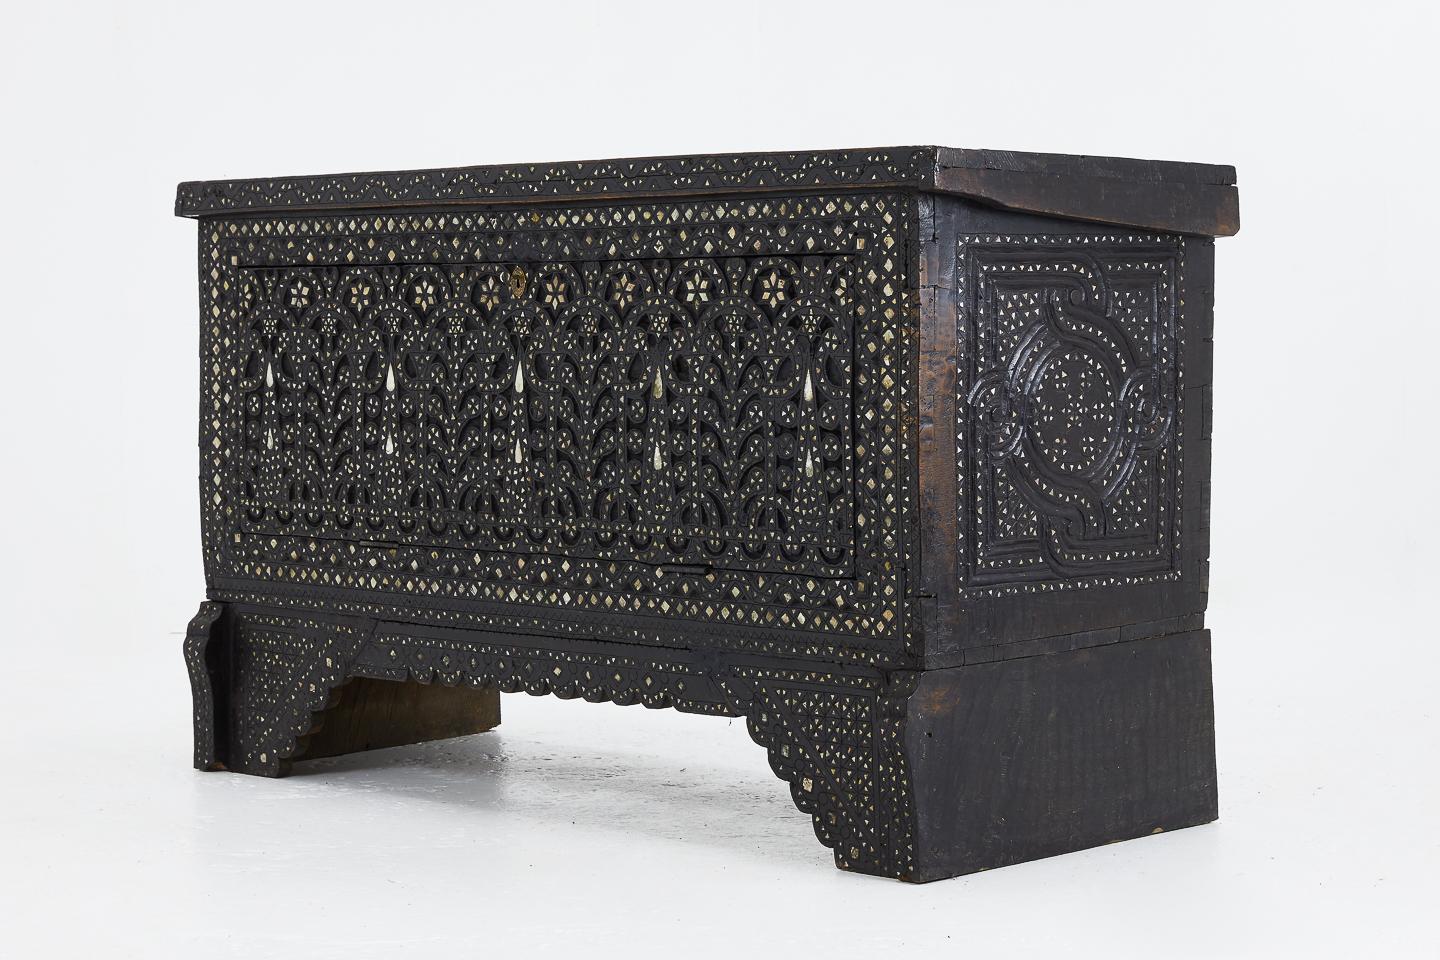 Late 19th century Syrian bone and mother of pearl inlaid chest. The front of the chest is cut out and hinged for easy access to the inside of the chest without having to lift the lid.
 